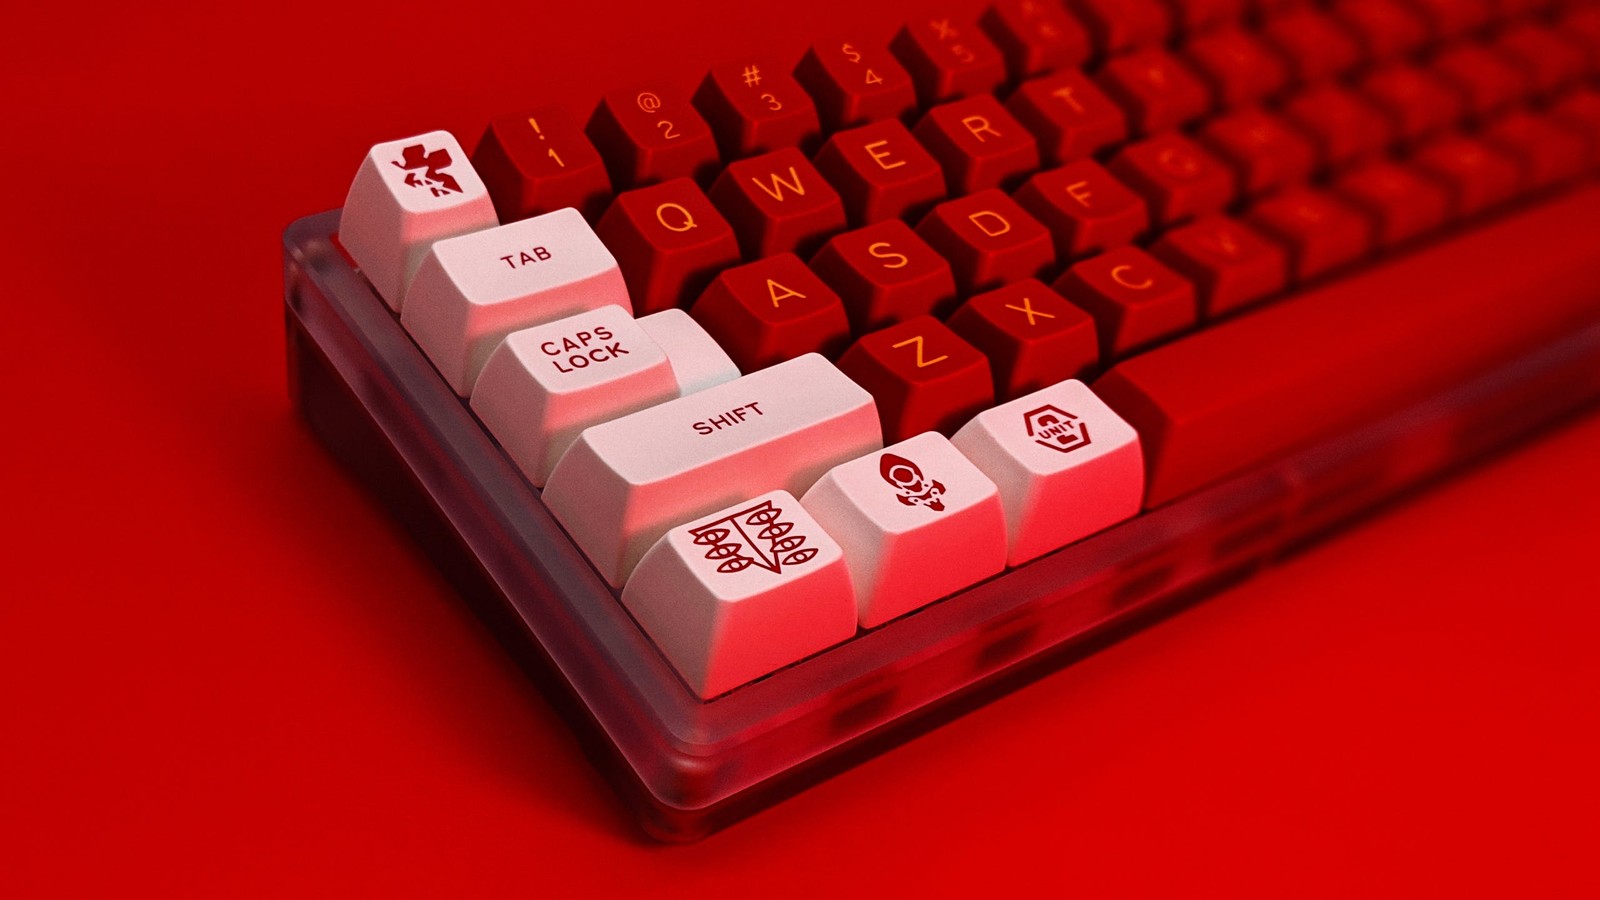 SA Berserk on a red background under a red light